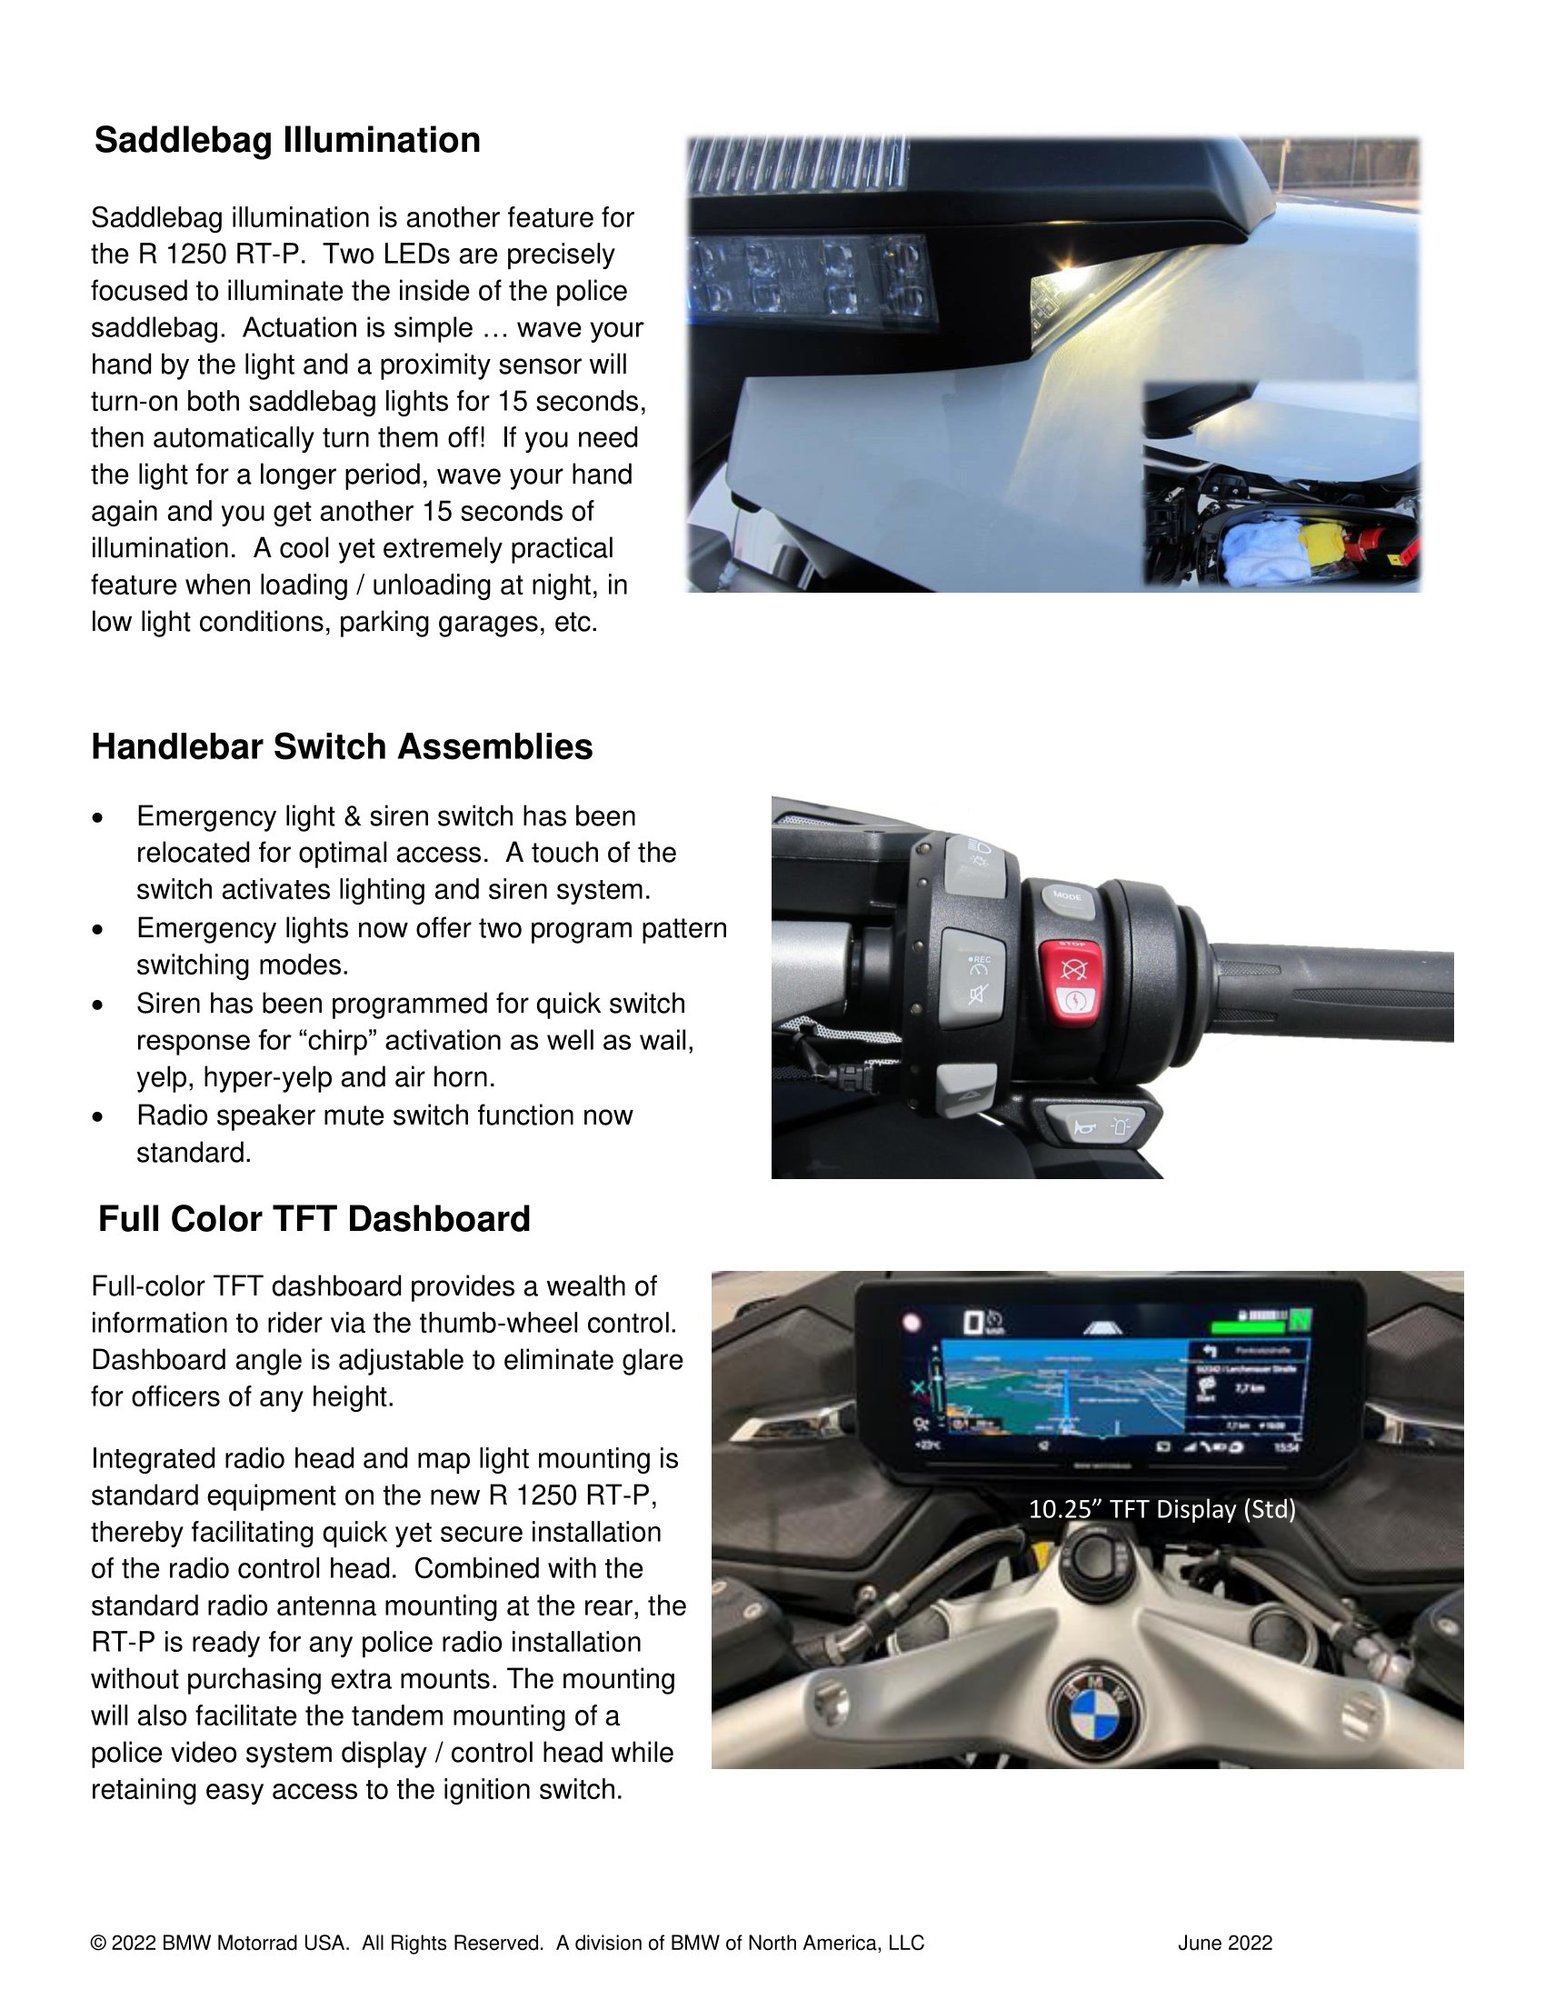 The R 1250 RT-P page 4